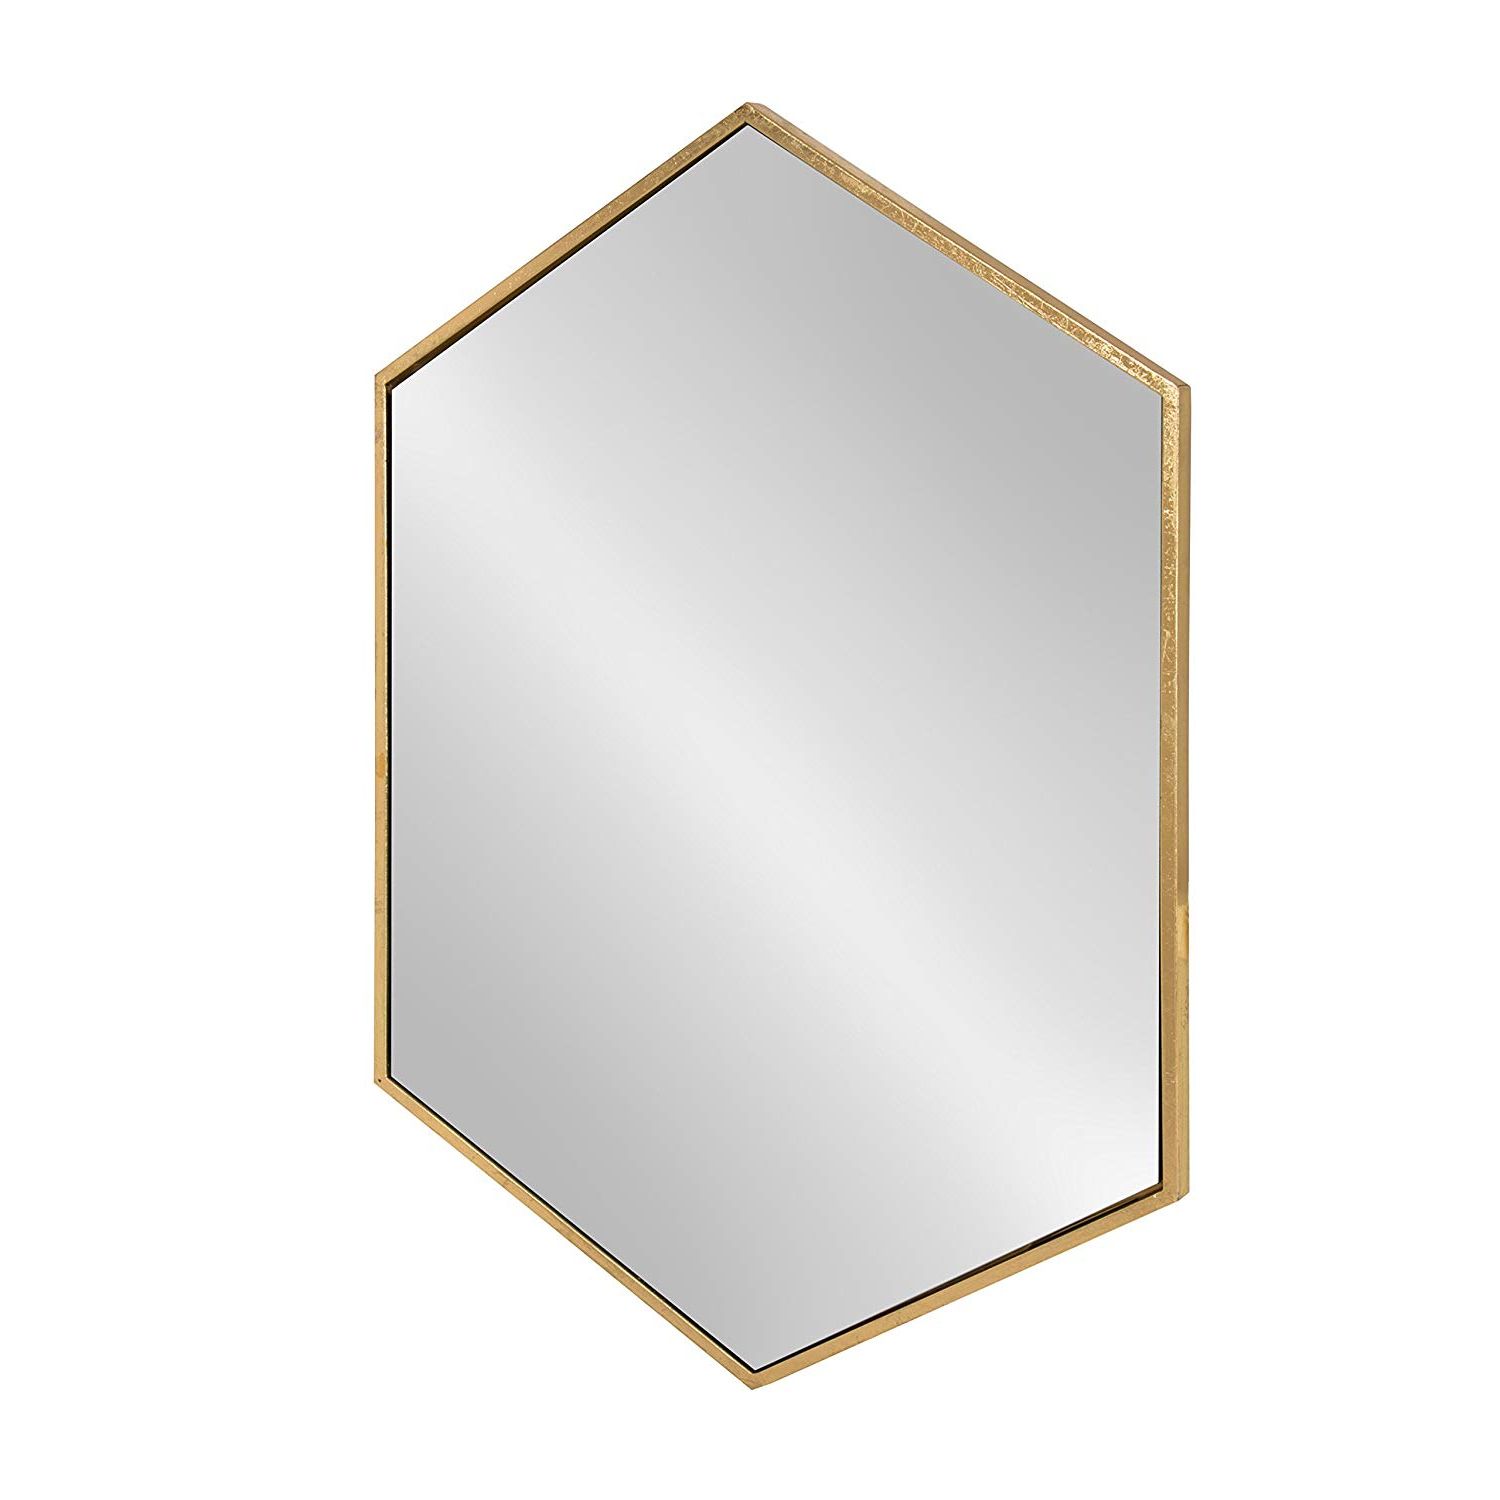 Kate And Laurel Mcneer Hexagon Metal Frame Wall Mirror With Gold Finish For  Bathrooms, Entryways, Bedrooms, And More, 31x22 Inches Intended For Most Popular Metal Framed Wall Mirrors (View 20 of 20)